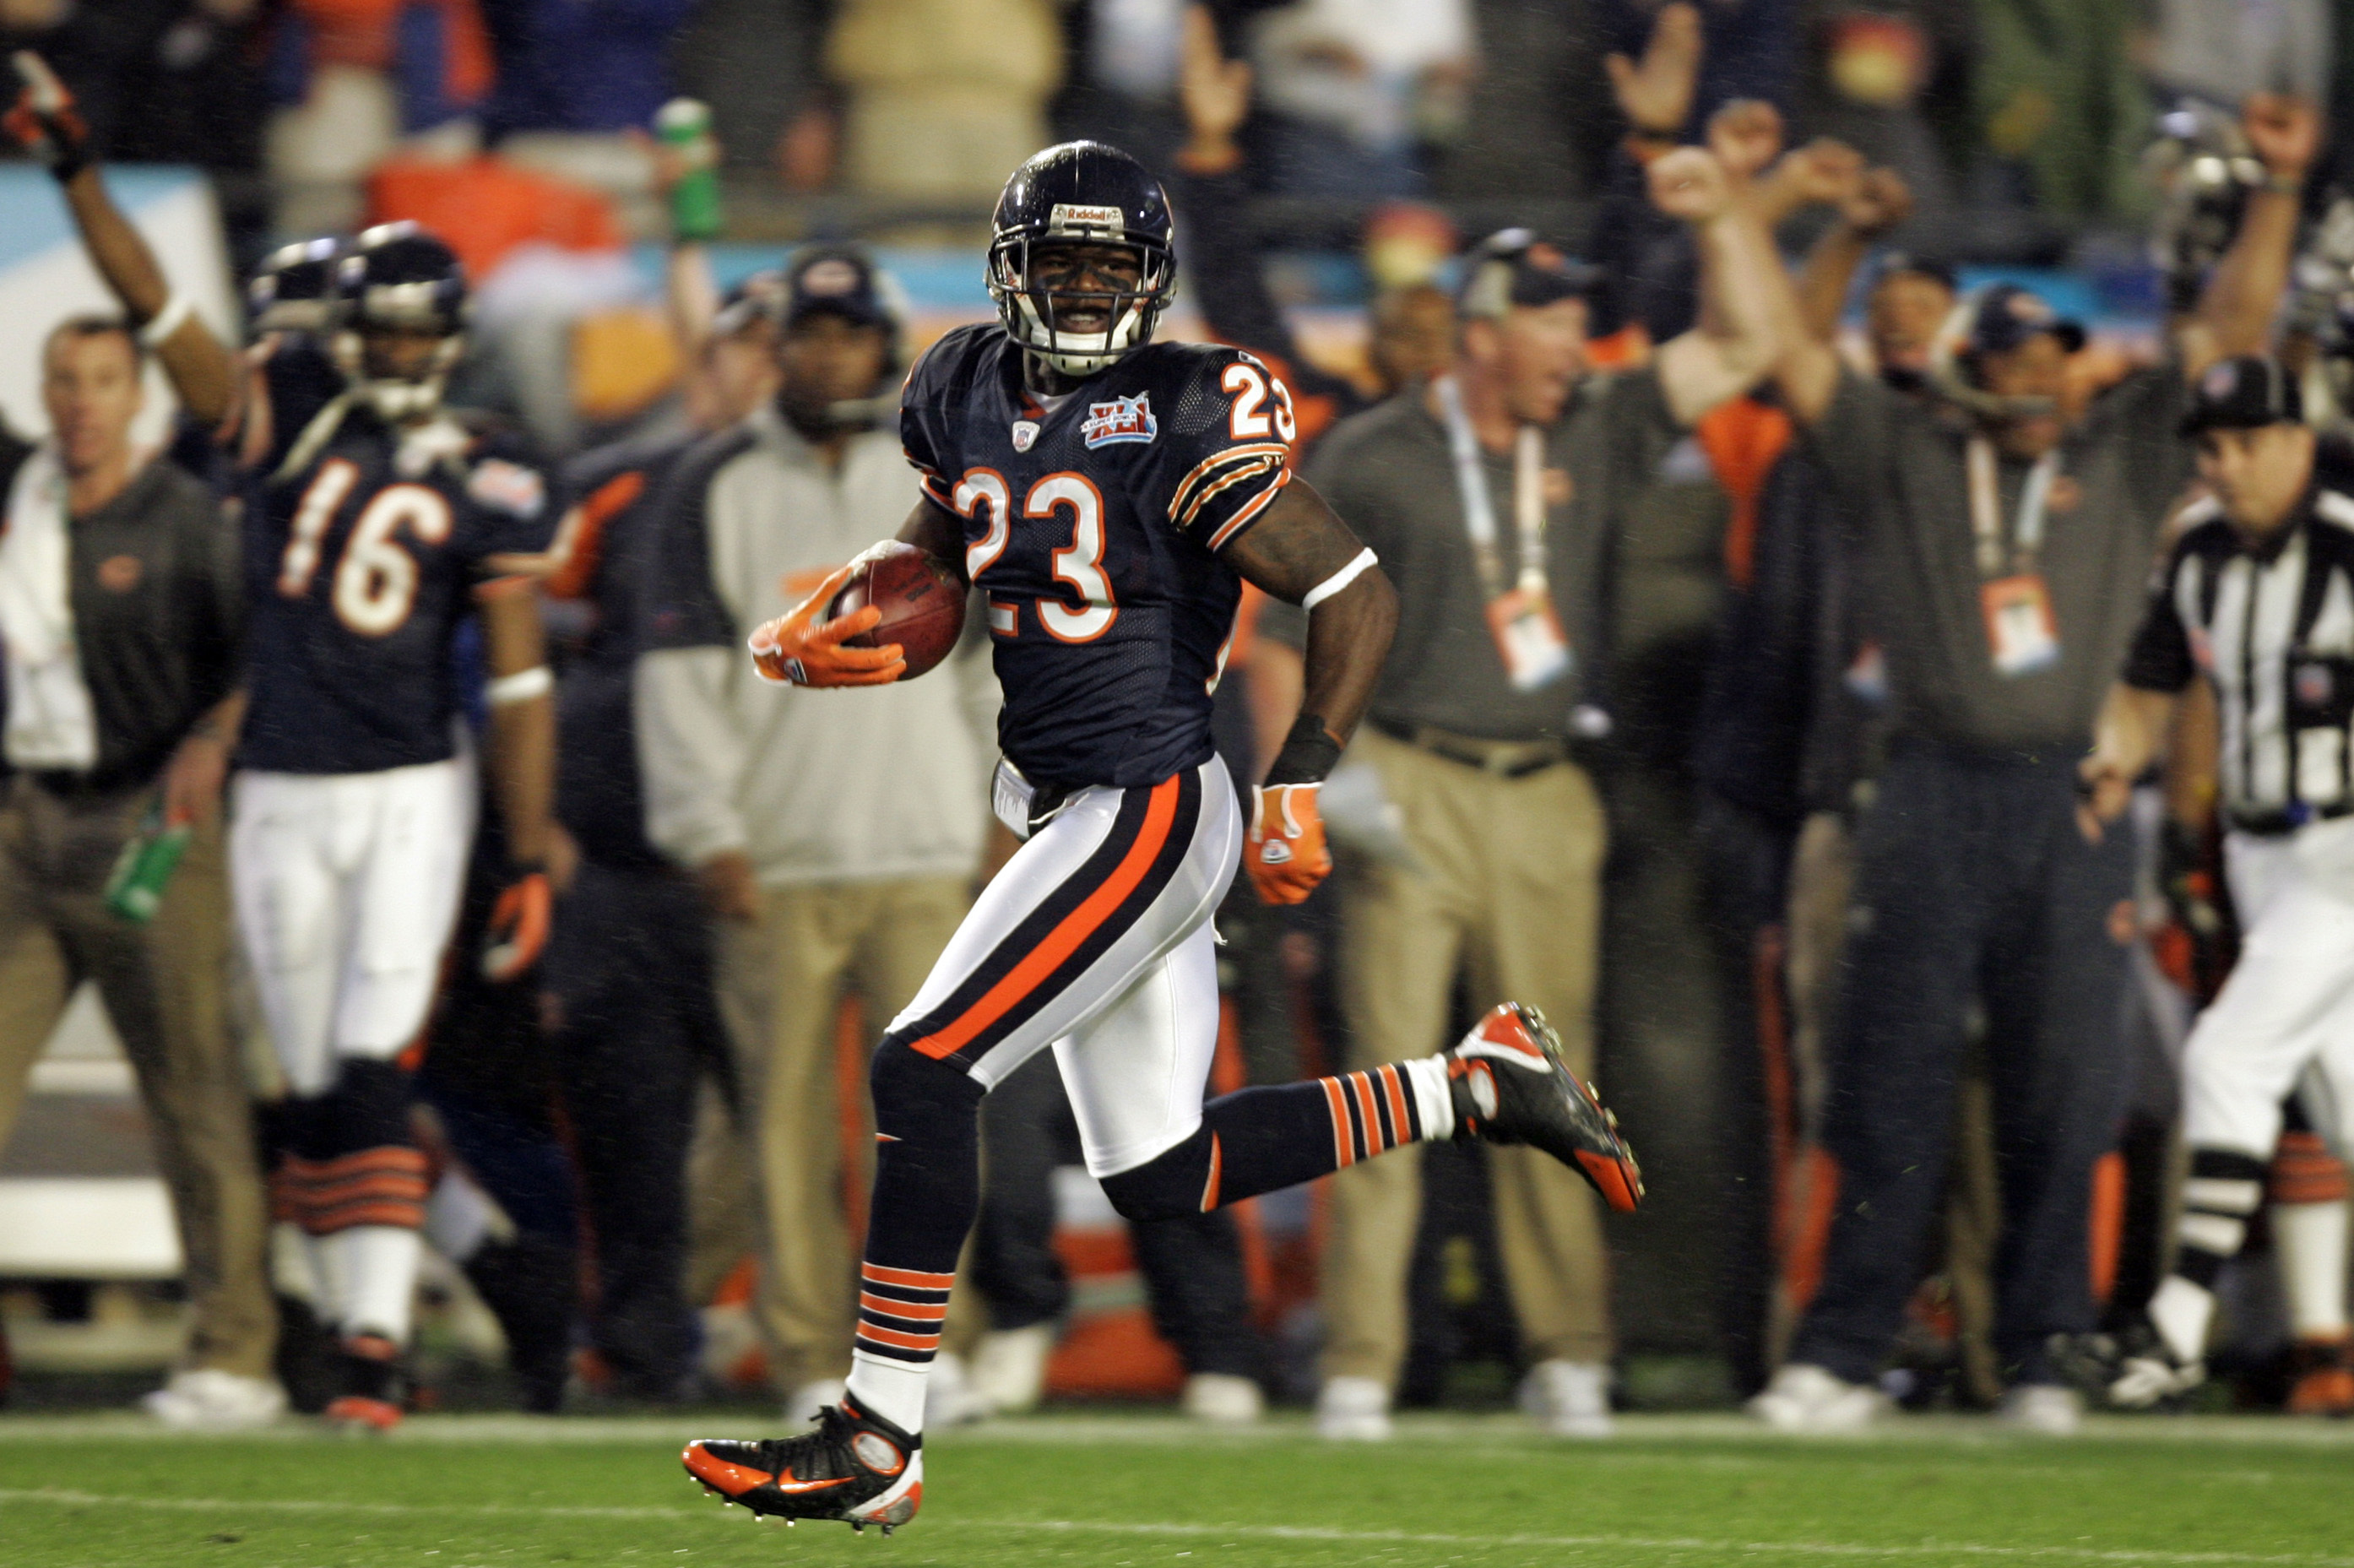 Devin Hester Announces Retirement from NFL After 11-Year Career